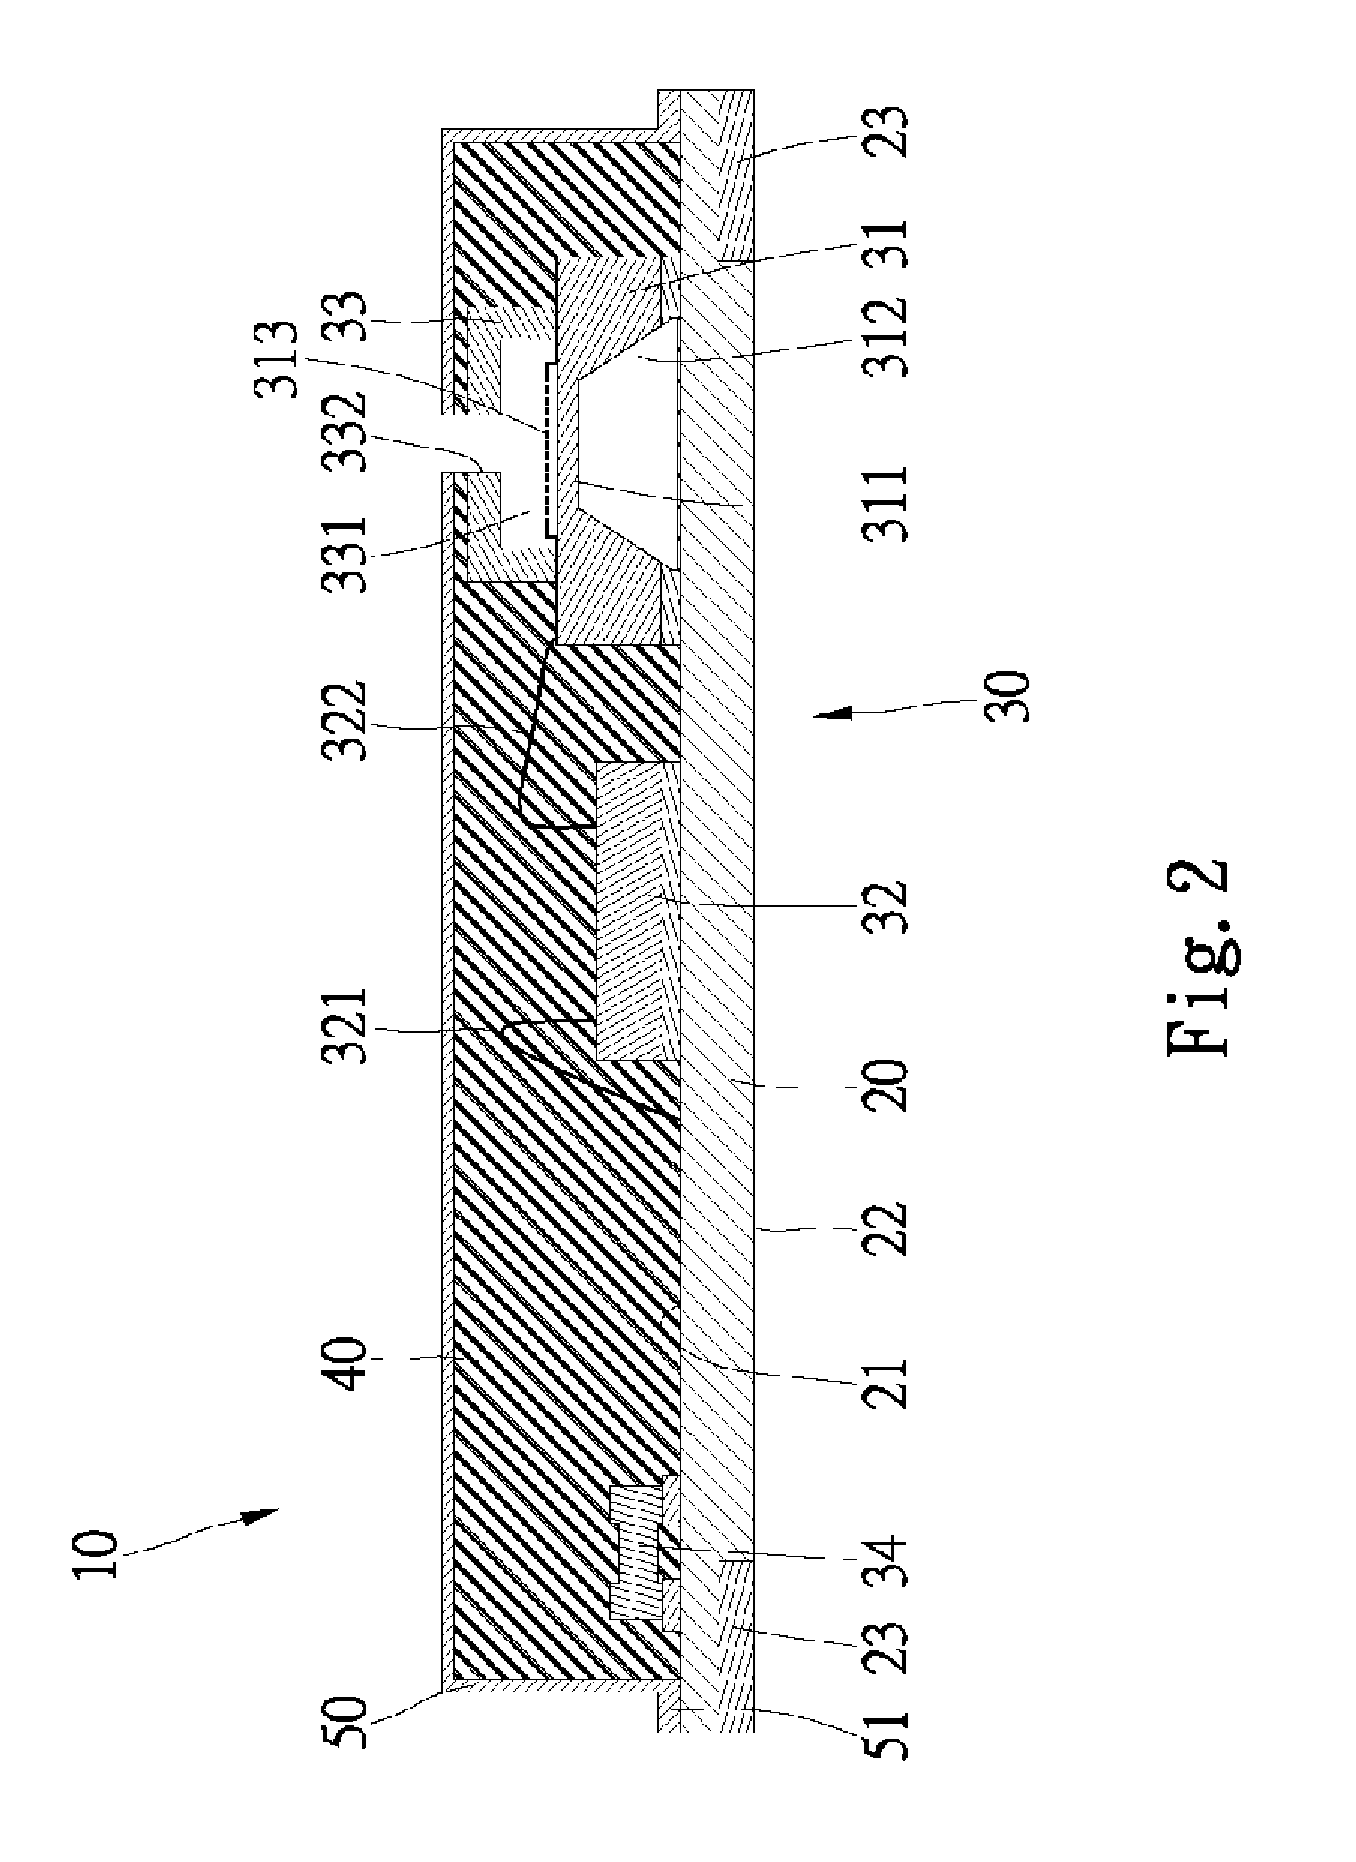 Micro-electromechanical system package